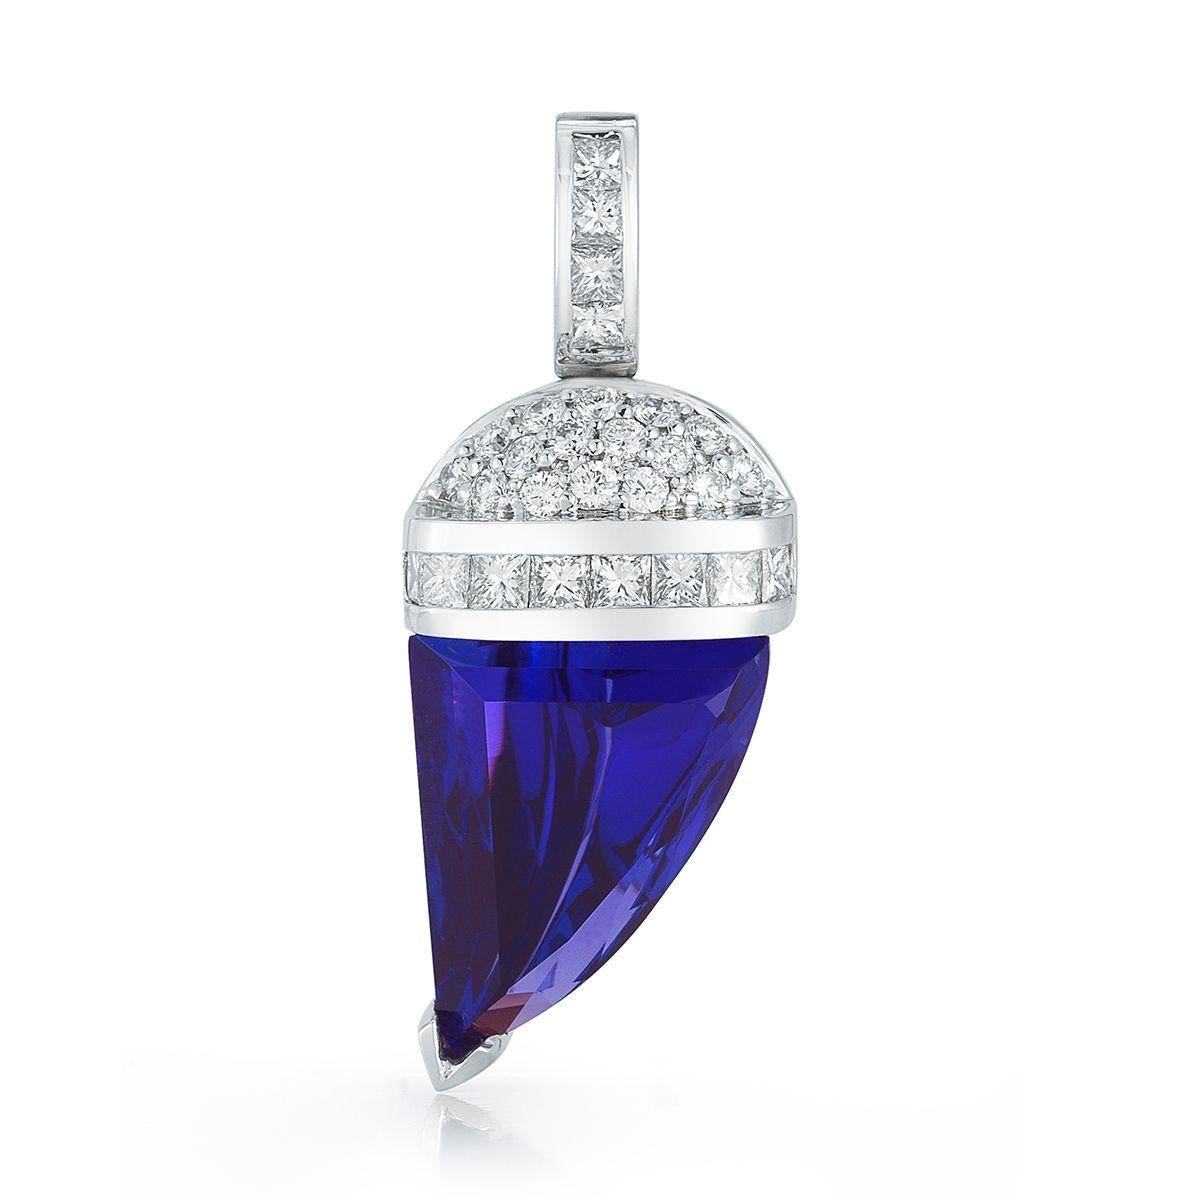 TANZANITE PENDANT
Reminiscent of tribal designs, this asymmetrical Tanzanite pendant is
edgy in the most beautiful way.
Item: # 01664
Metal: 18k W
Color Weight: 8.39 ct.
Diamond Weight: 0.84 ct.